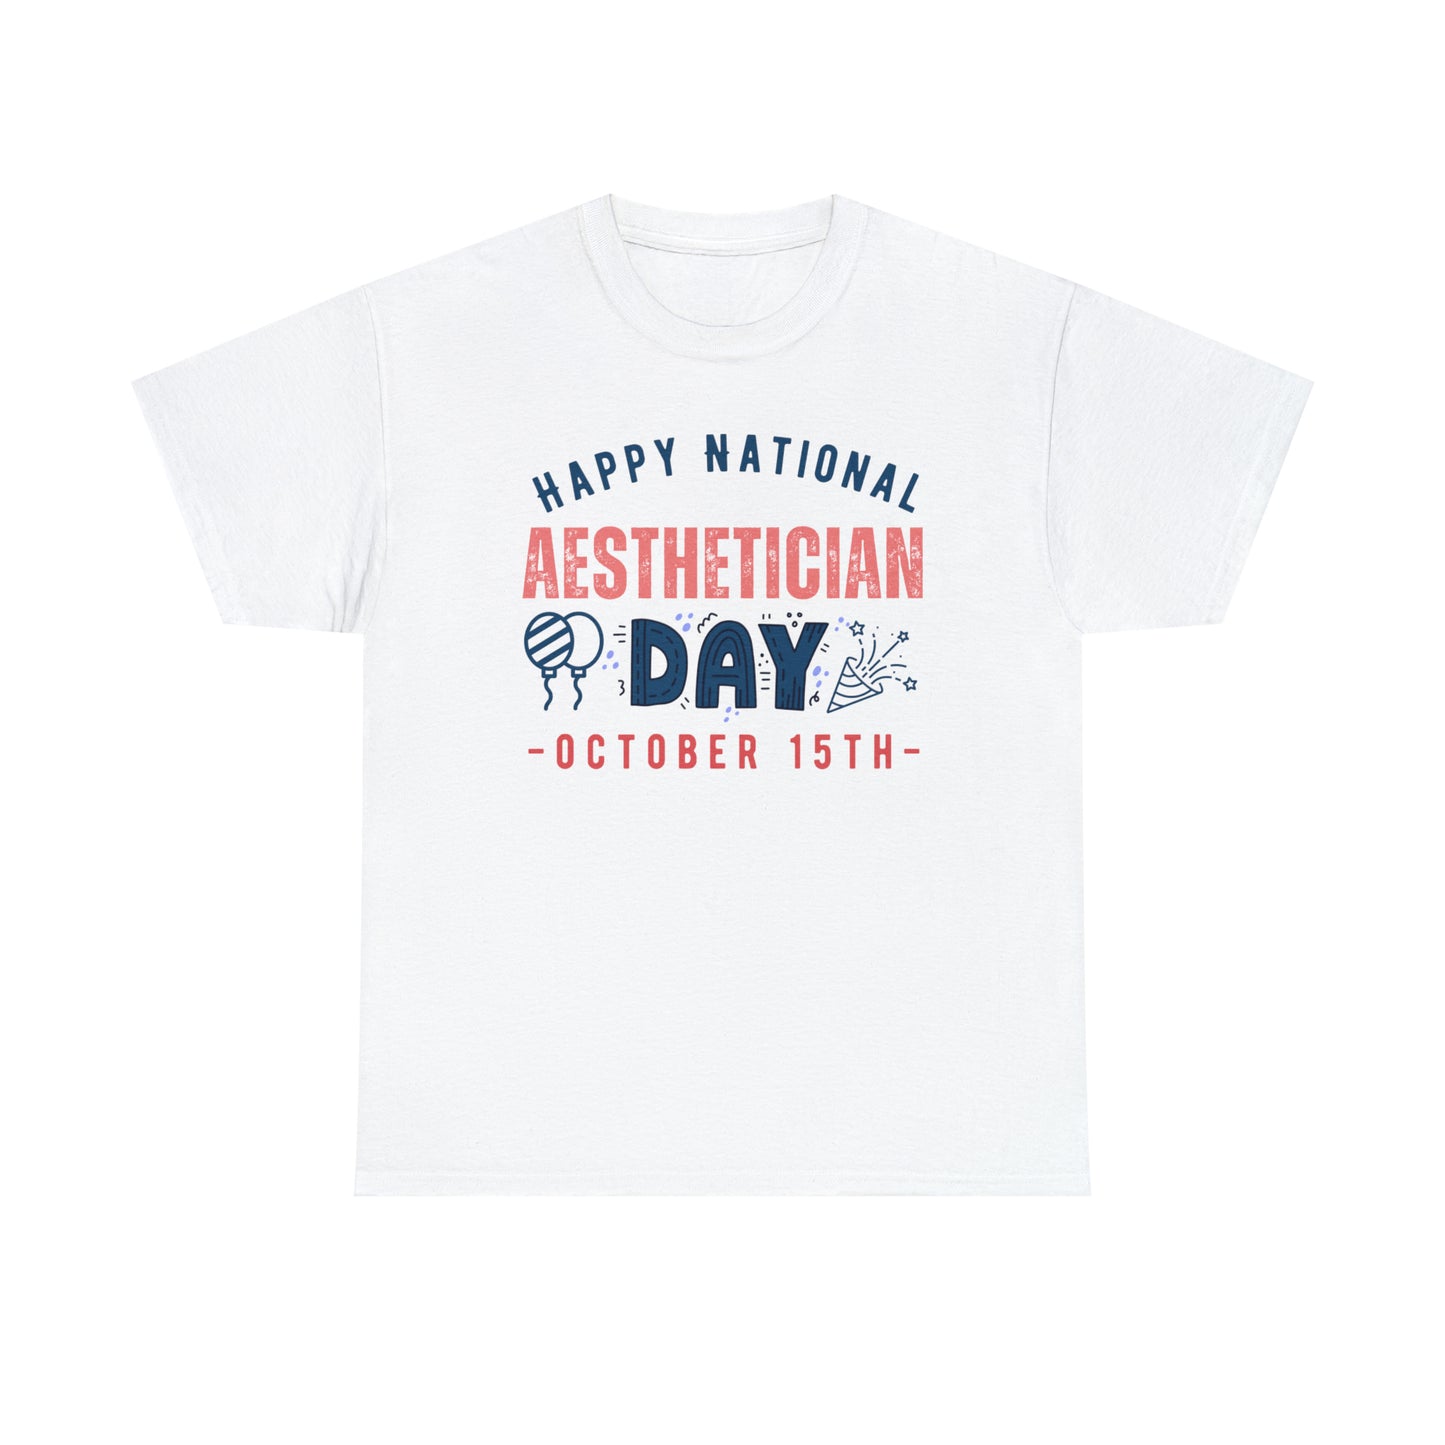 Happy National Aesthetician Day October 15th Occupation T-Shirt | Unisex Tee Shirt